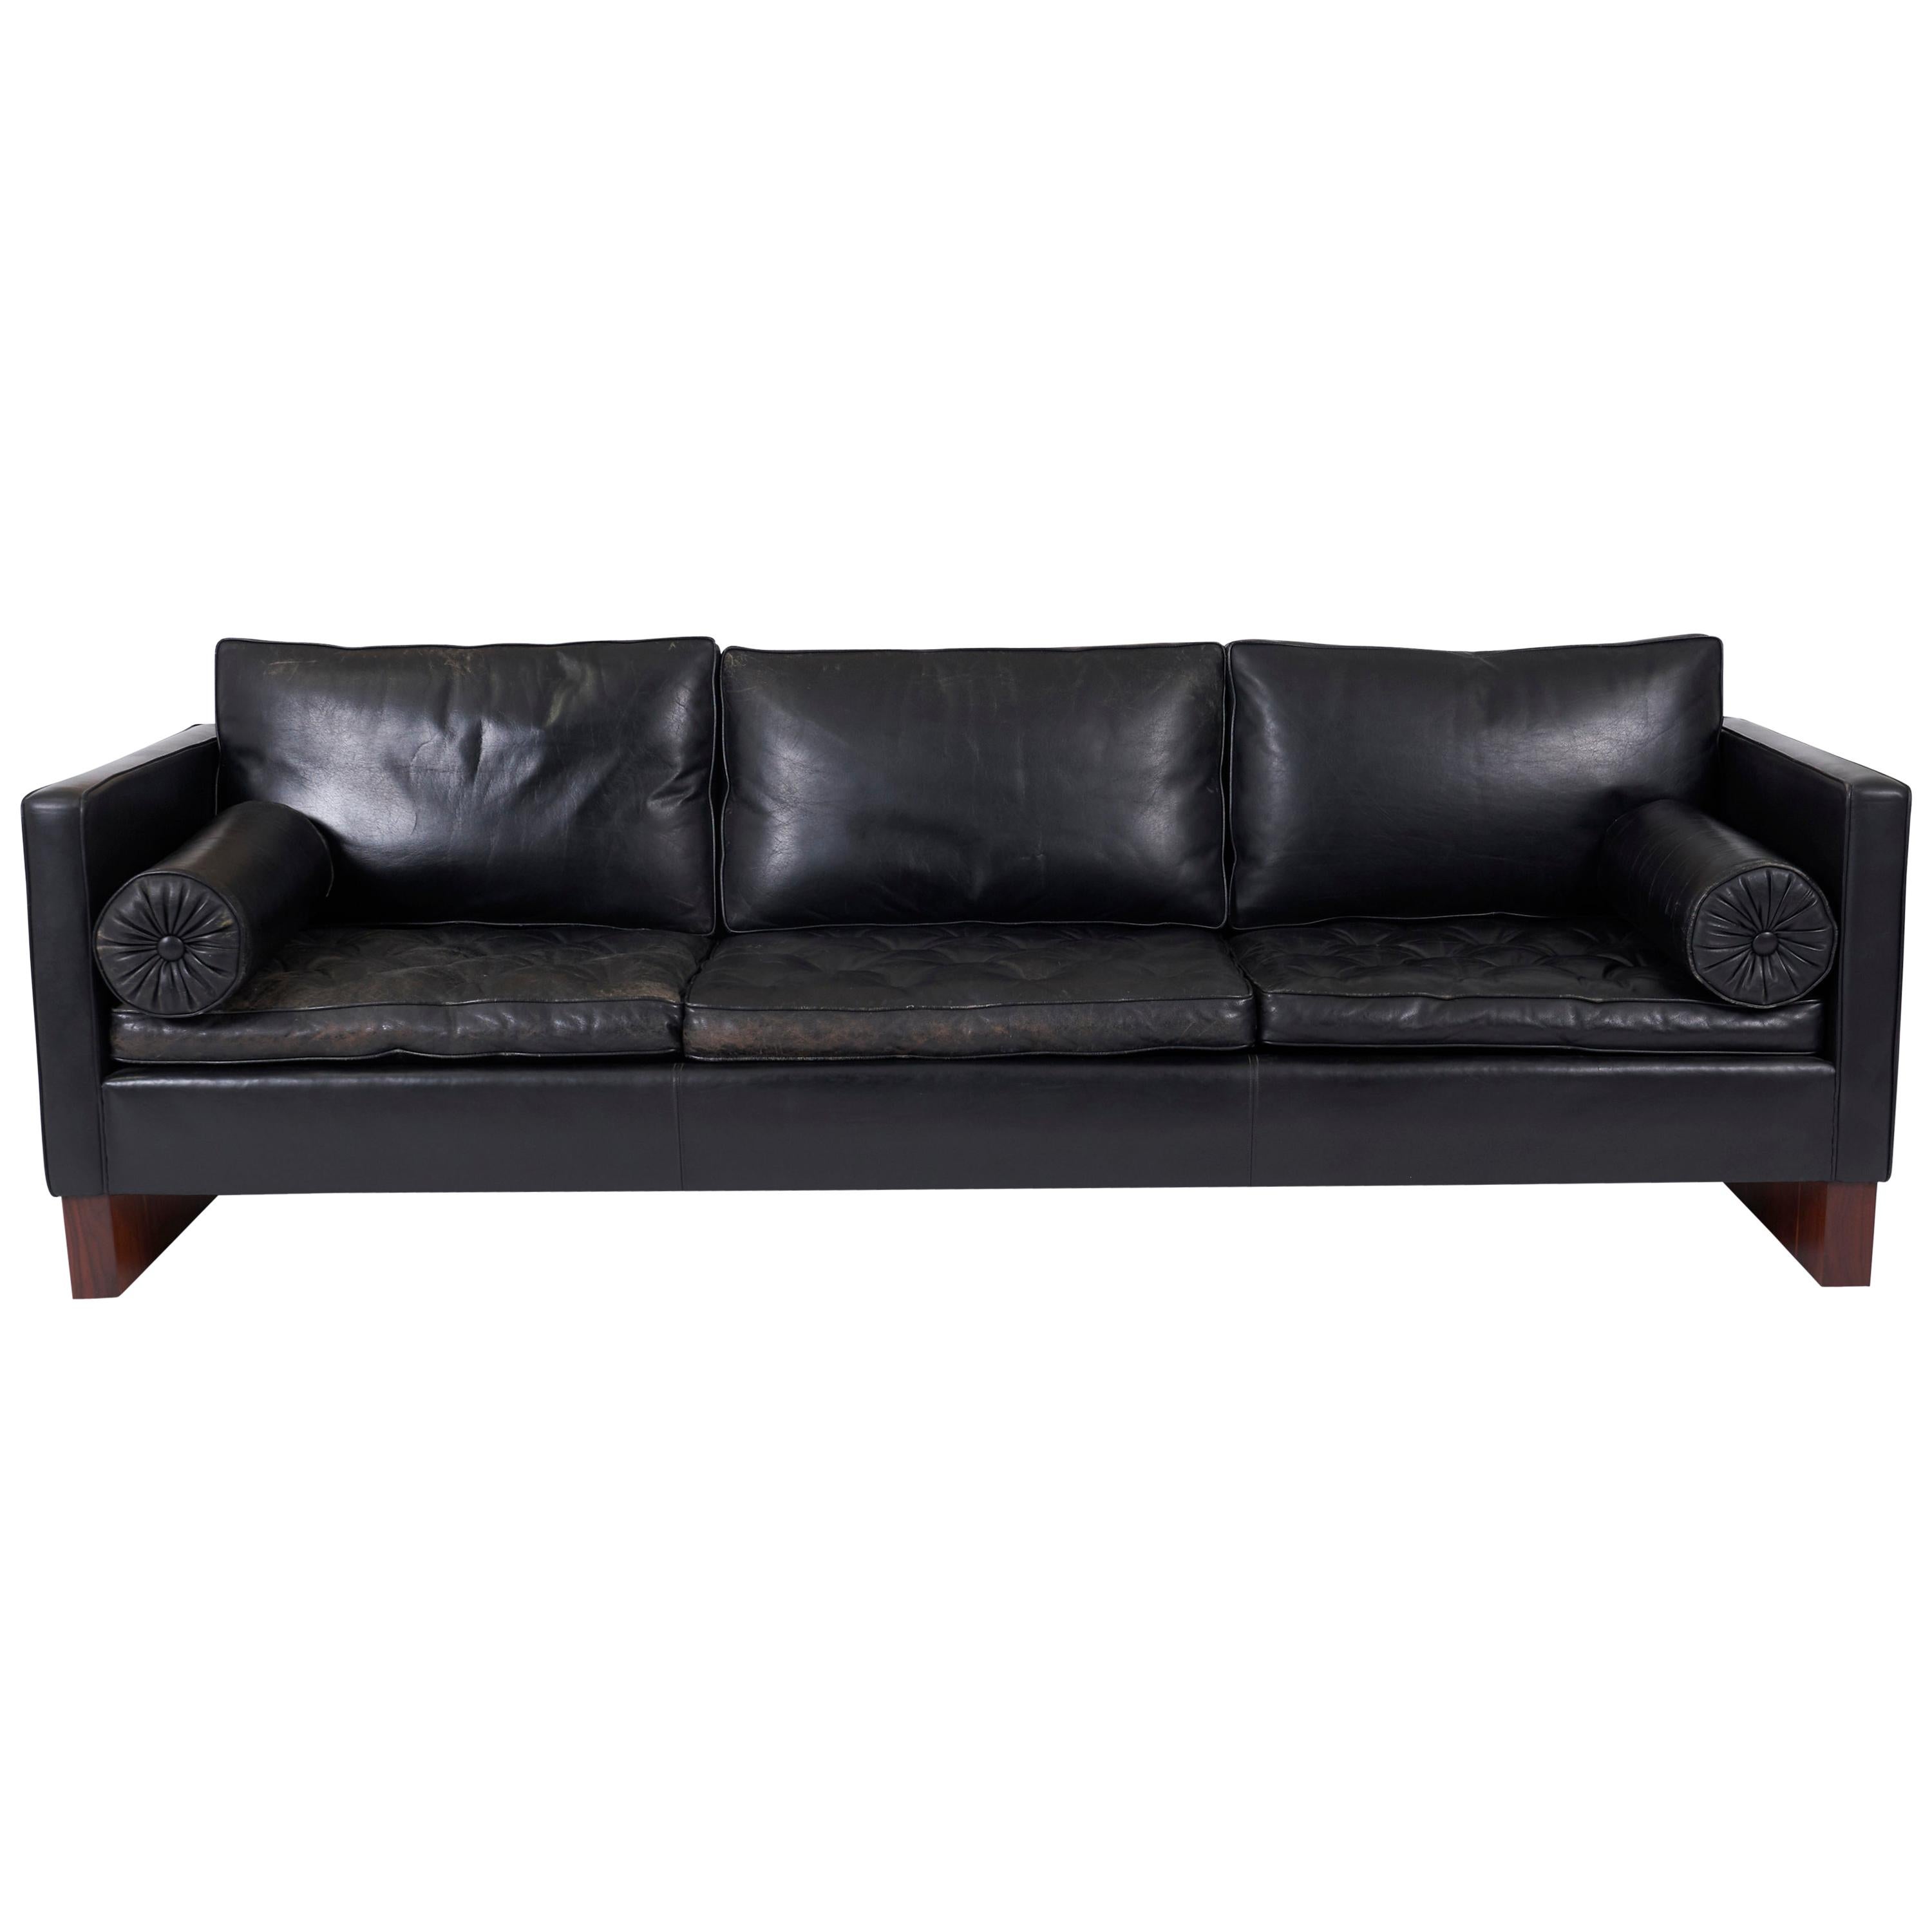 Rosewood and Leather Sofa, Ludwig Mies van der Rohe, Knoll, 1960